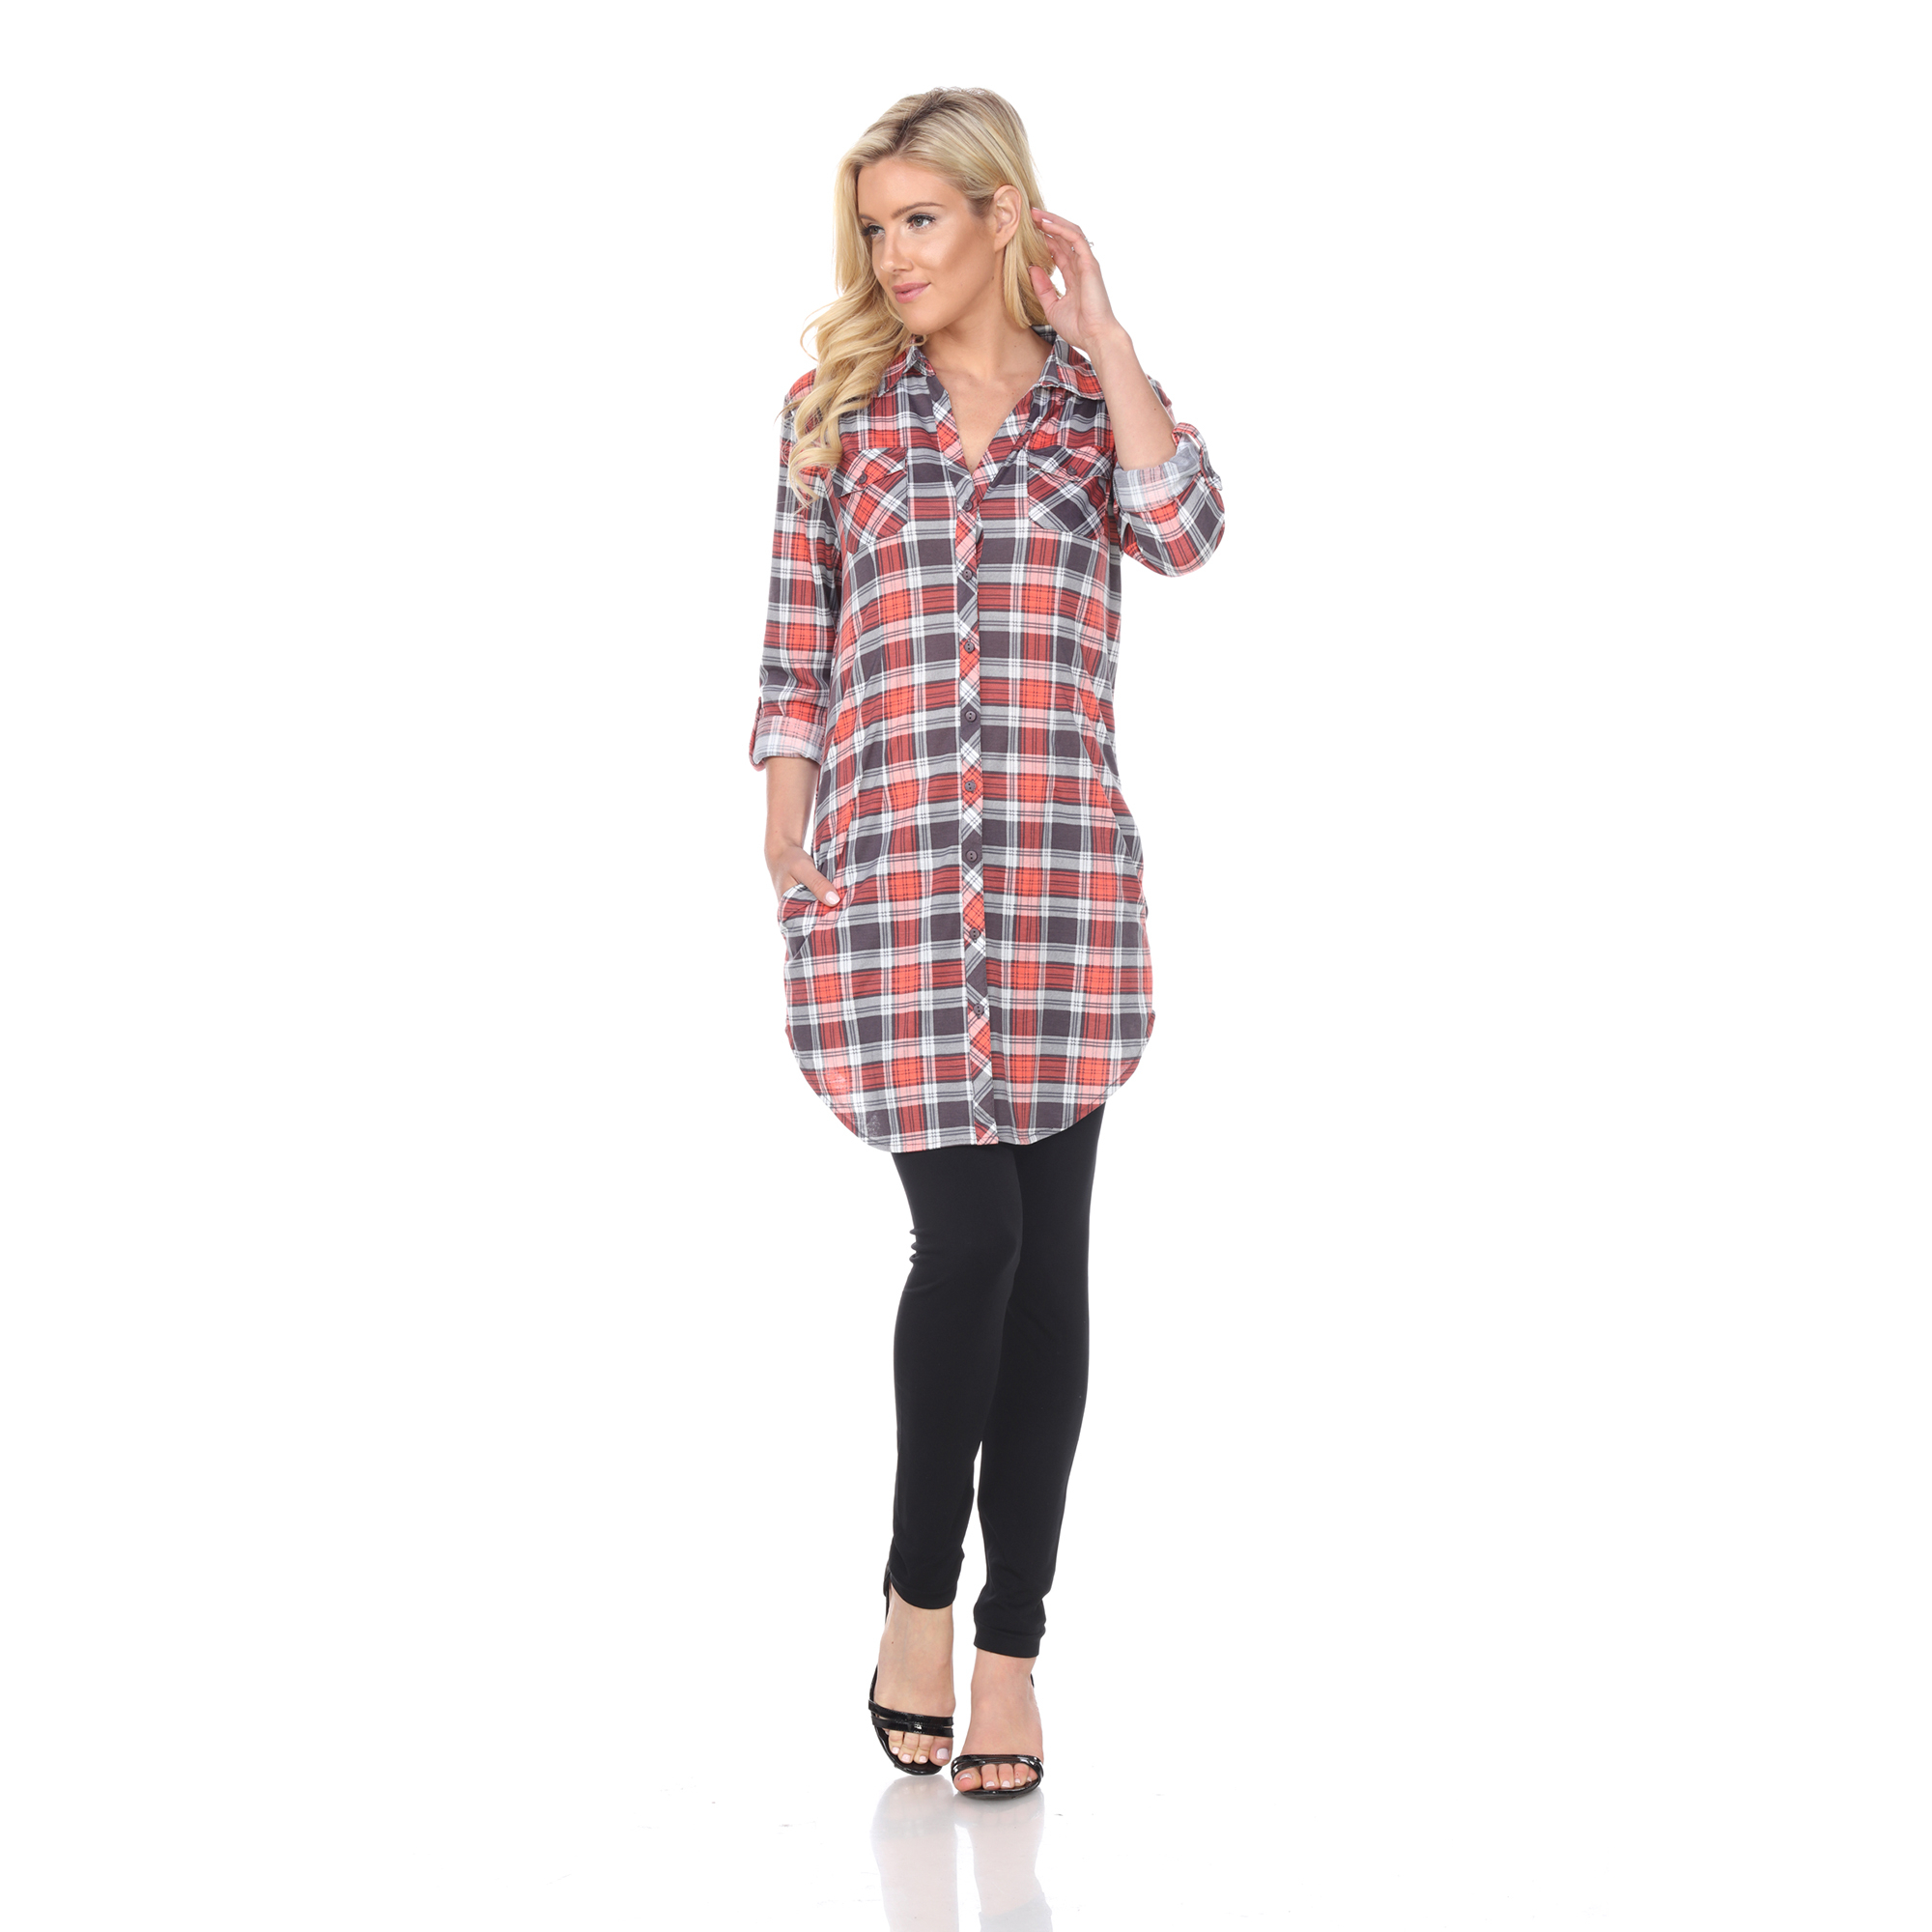 White Mark Women's Stretchy Plaid Flannel Tunic Top - Grey/Coral, Large